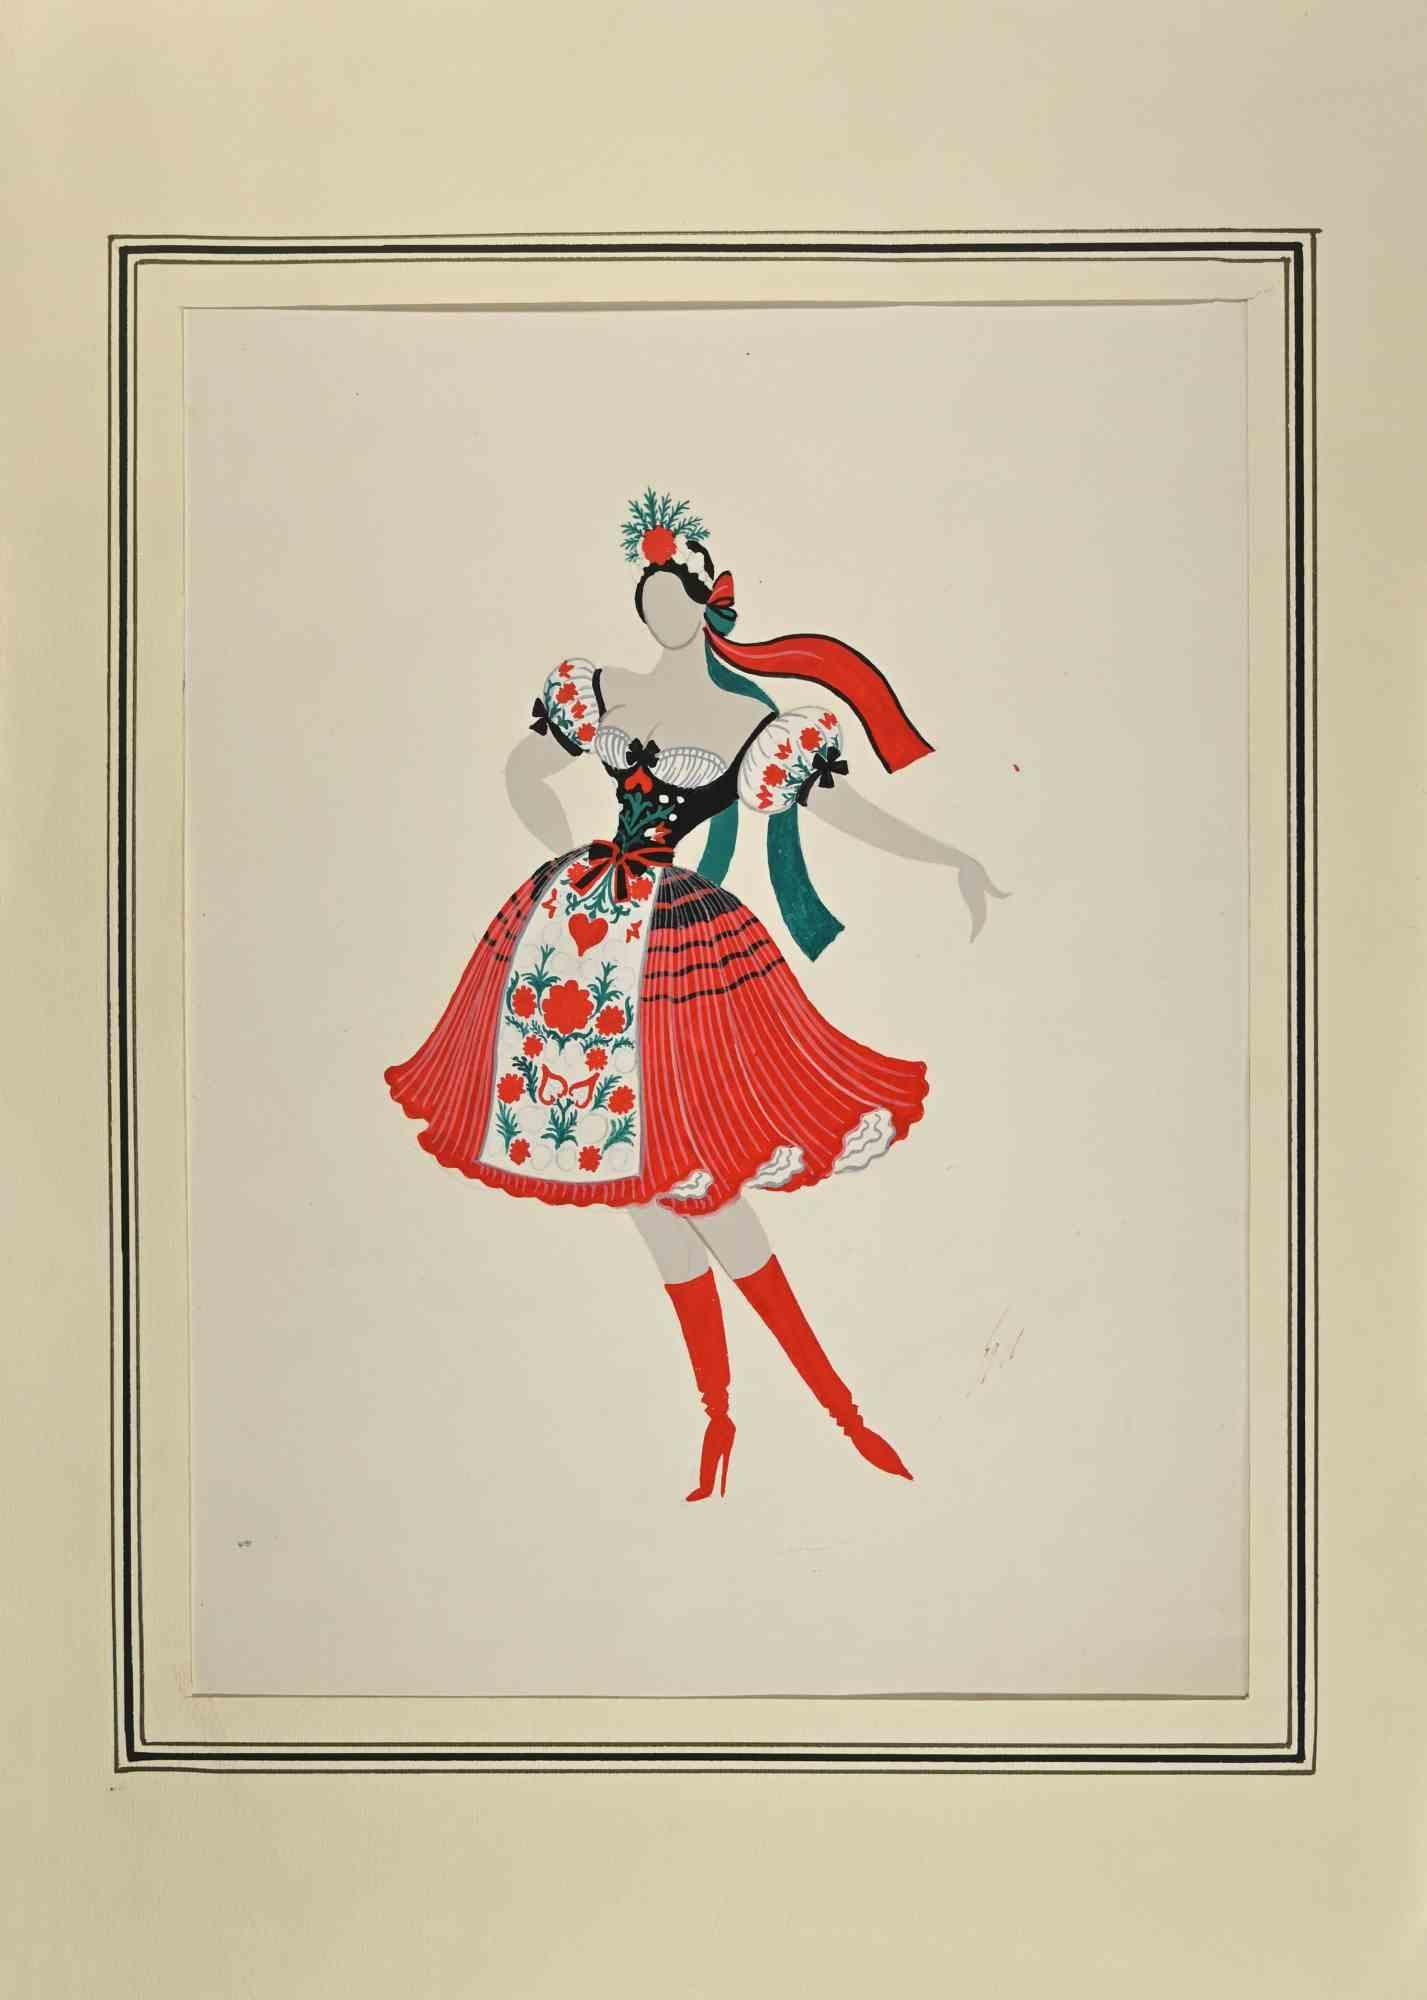 Costume Design is a contemporary artwork realized in 1970s by Erté (Romain de Tirtoff).

Mixed colored gouache on paper.

Hand signed.

Includes passepartout: 50 x 35 cm

Good conditions except for minor stains, foxings and a little